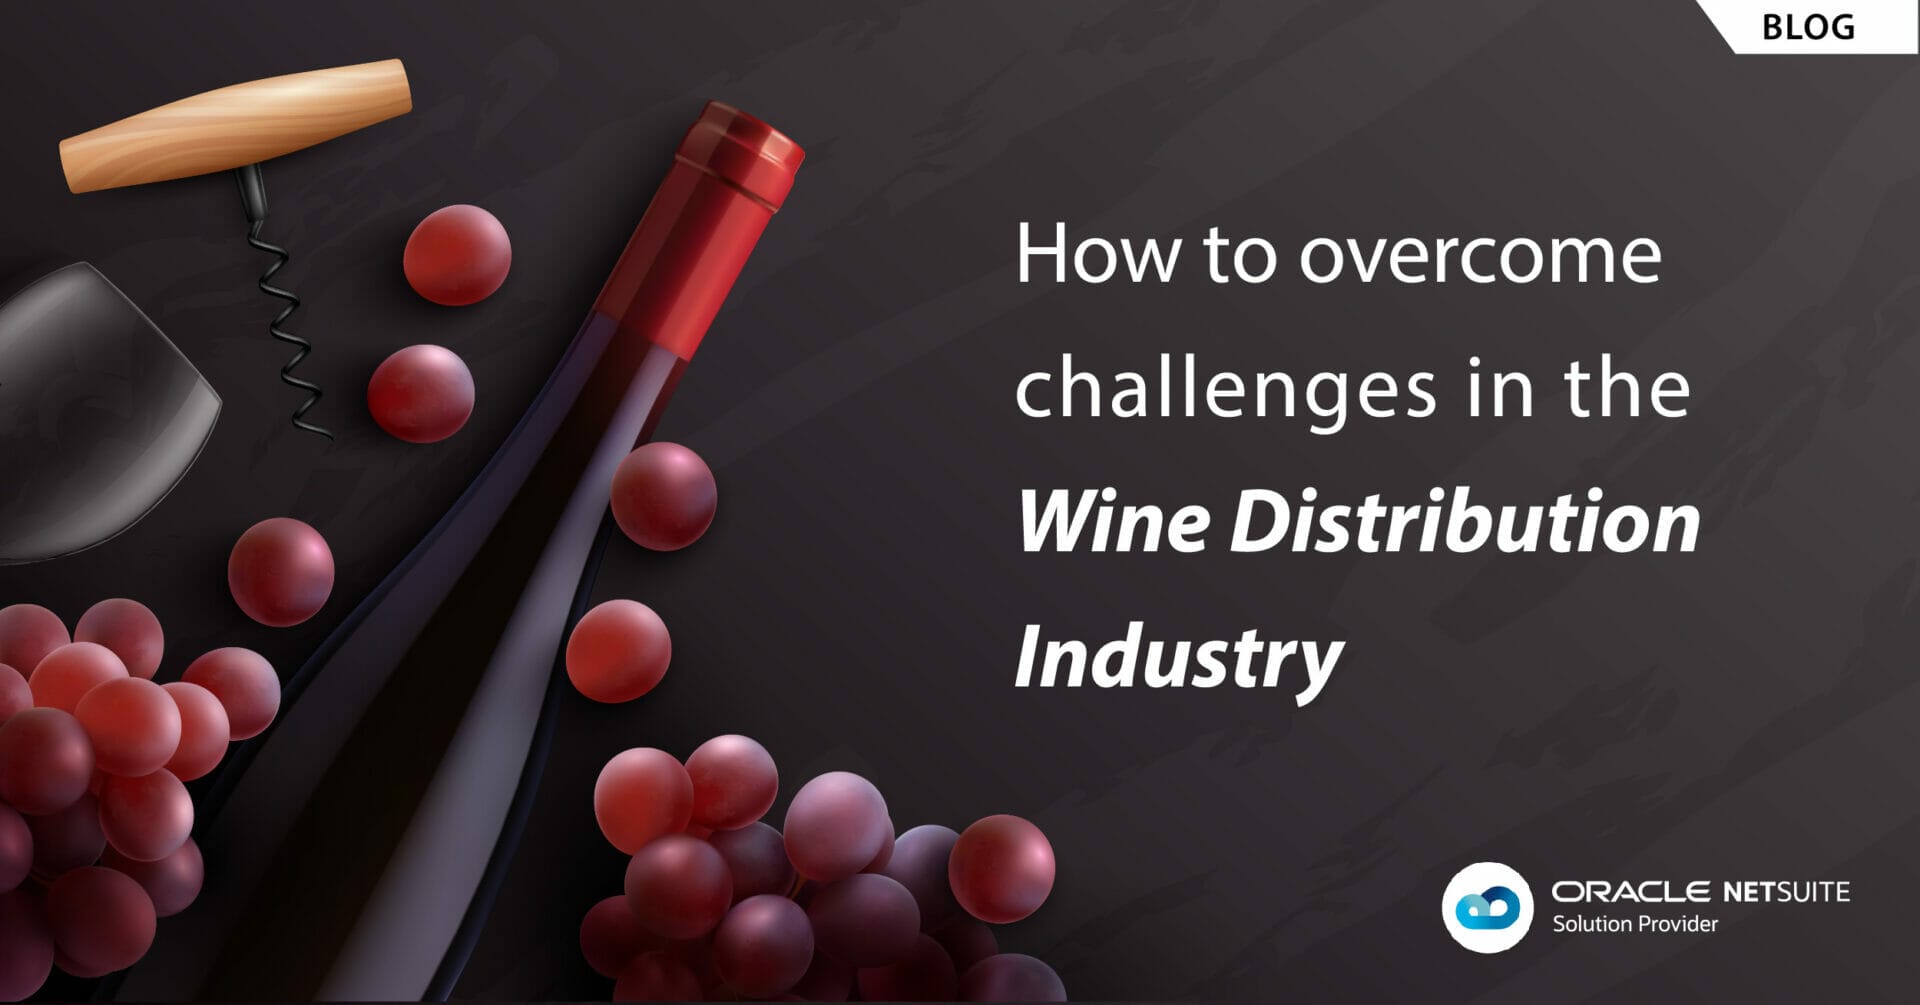 How to overcome challenges in the Wine Distribution Industry